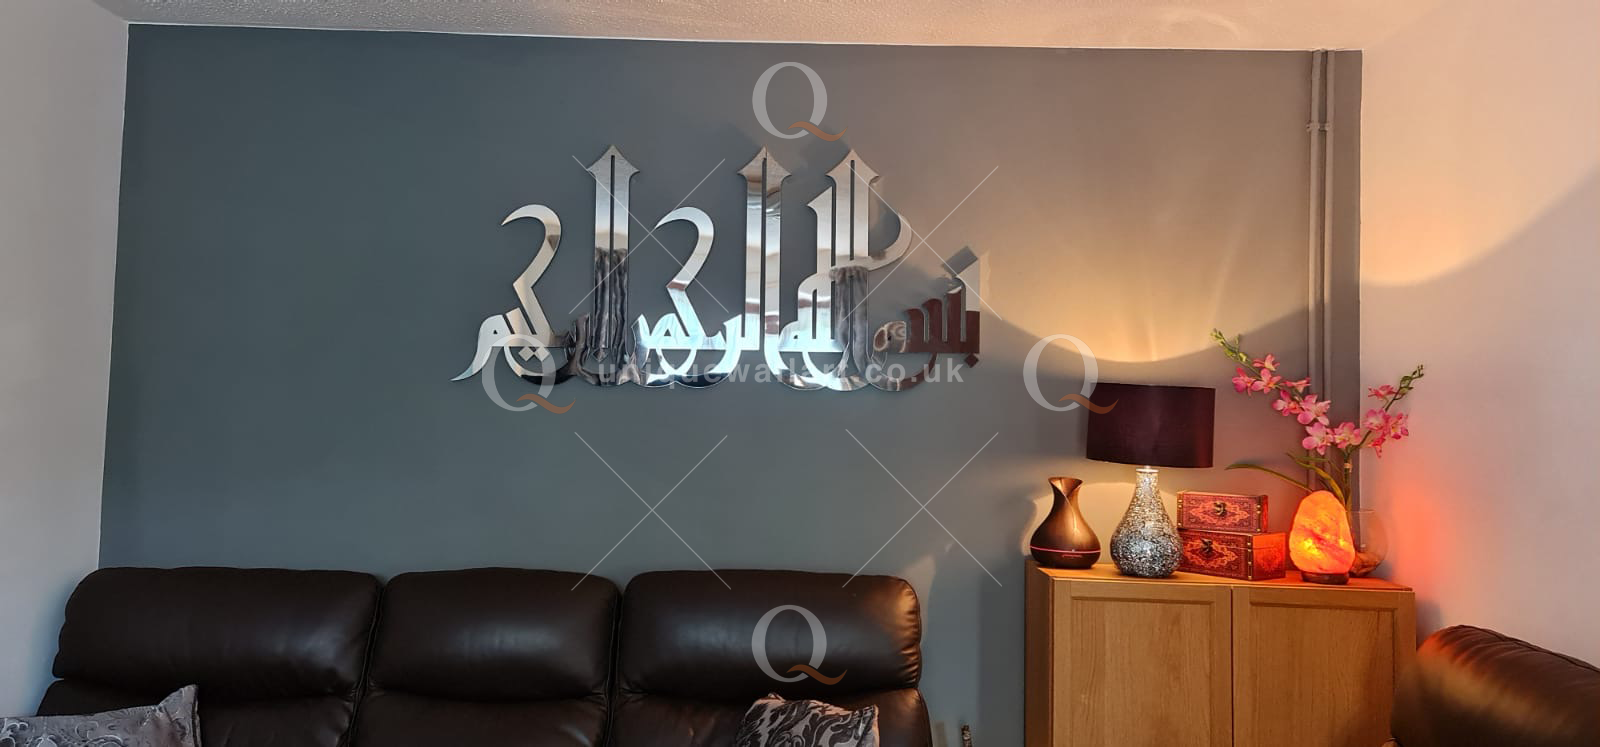 New 3D Stainless Steel Bismillah Islamic Calligraphy Wall Art